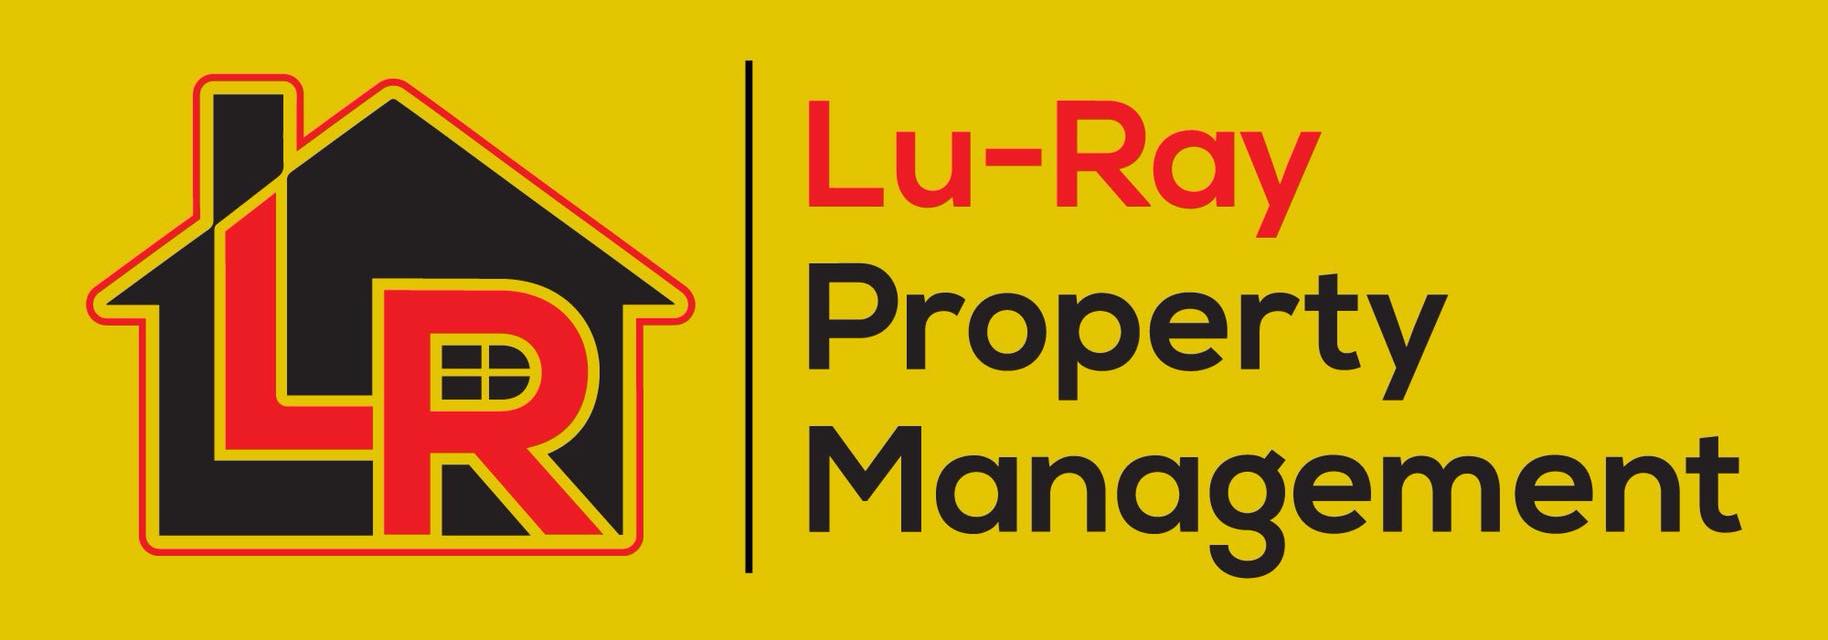 LU-RAY PROPERTY MANAGEMENT   Leasing Info:  (405) 510-0085  Office:  (405) 510-0751 Dial 9 for After Hrs Emergency